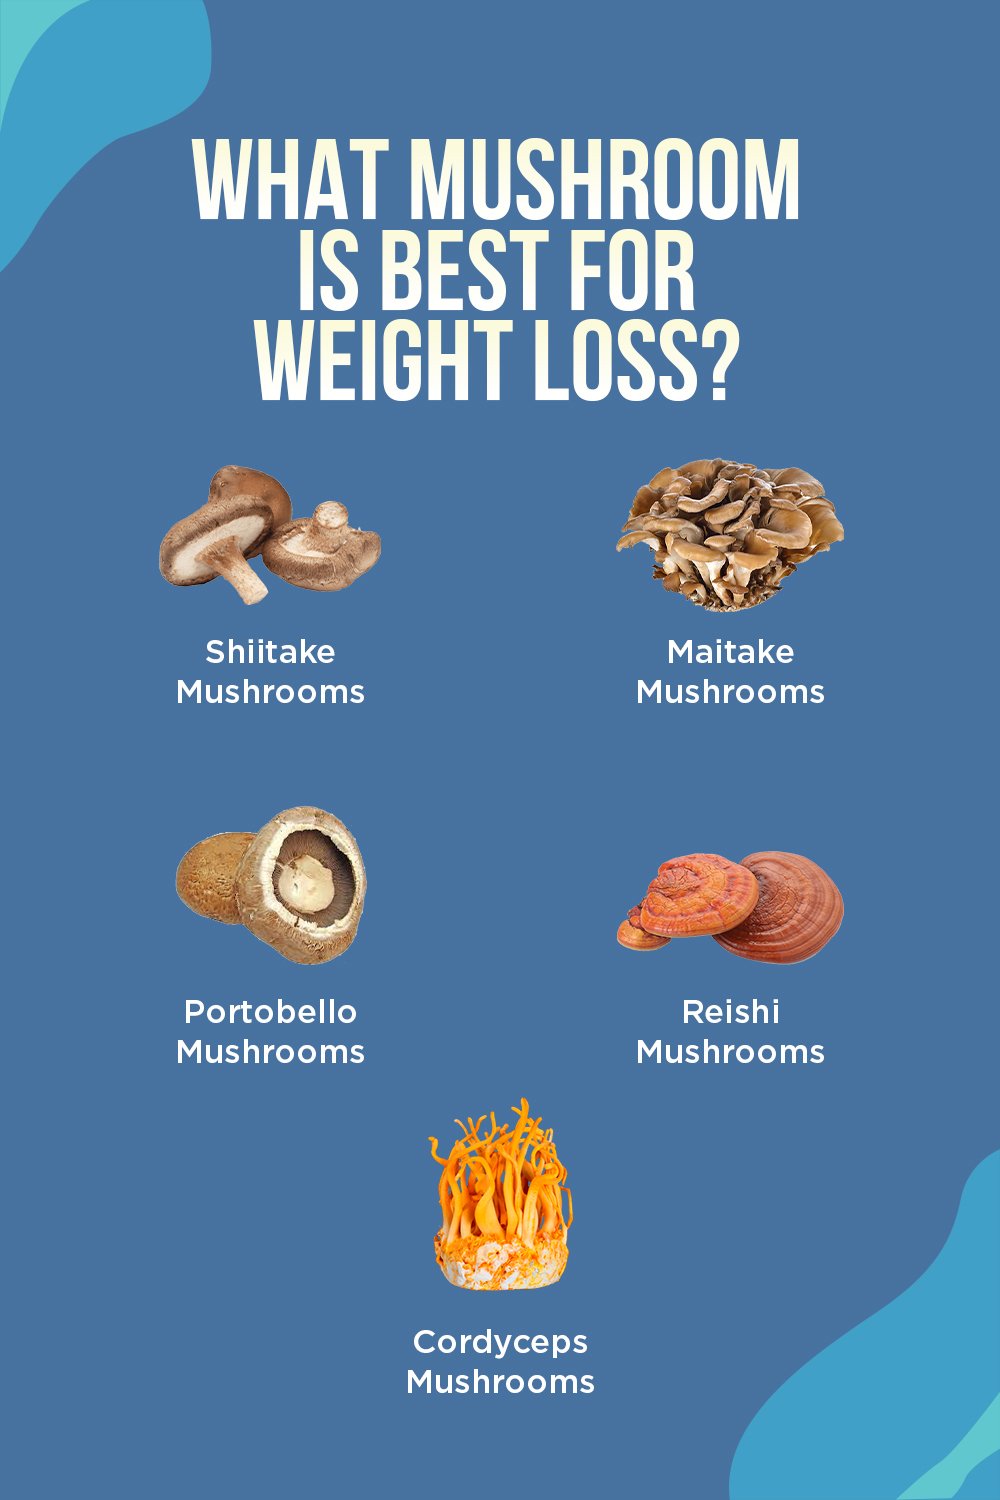 Are Mushrooms Good for Weight Loss